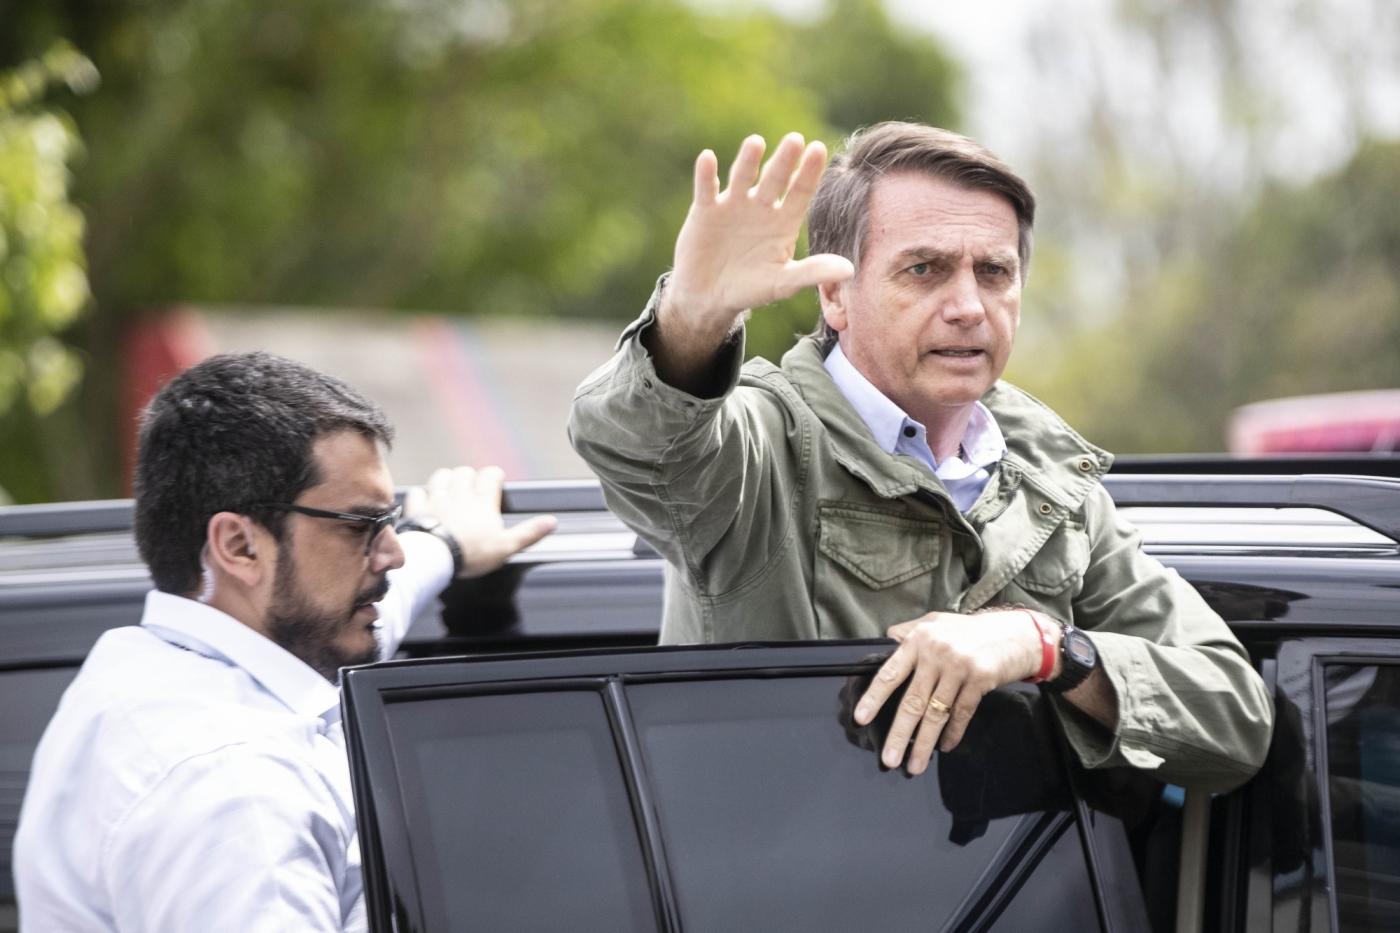 RIO DE JANEIRO, Oct. 28, 2018 (Xinhua) -- Presidential candidate Jair Bolsonaro waves to his supporters as he leaves a polling station in Rio de Janeiro, Brazil, on Oct. 28, 2018. Right-wing candidate Jair Bolsonaro won Brazil's presidential run-off on Sunday. (Xinhua/Li Ming/IANS) by .